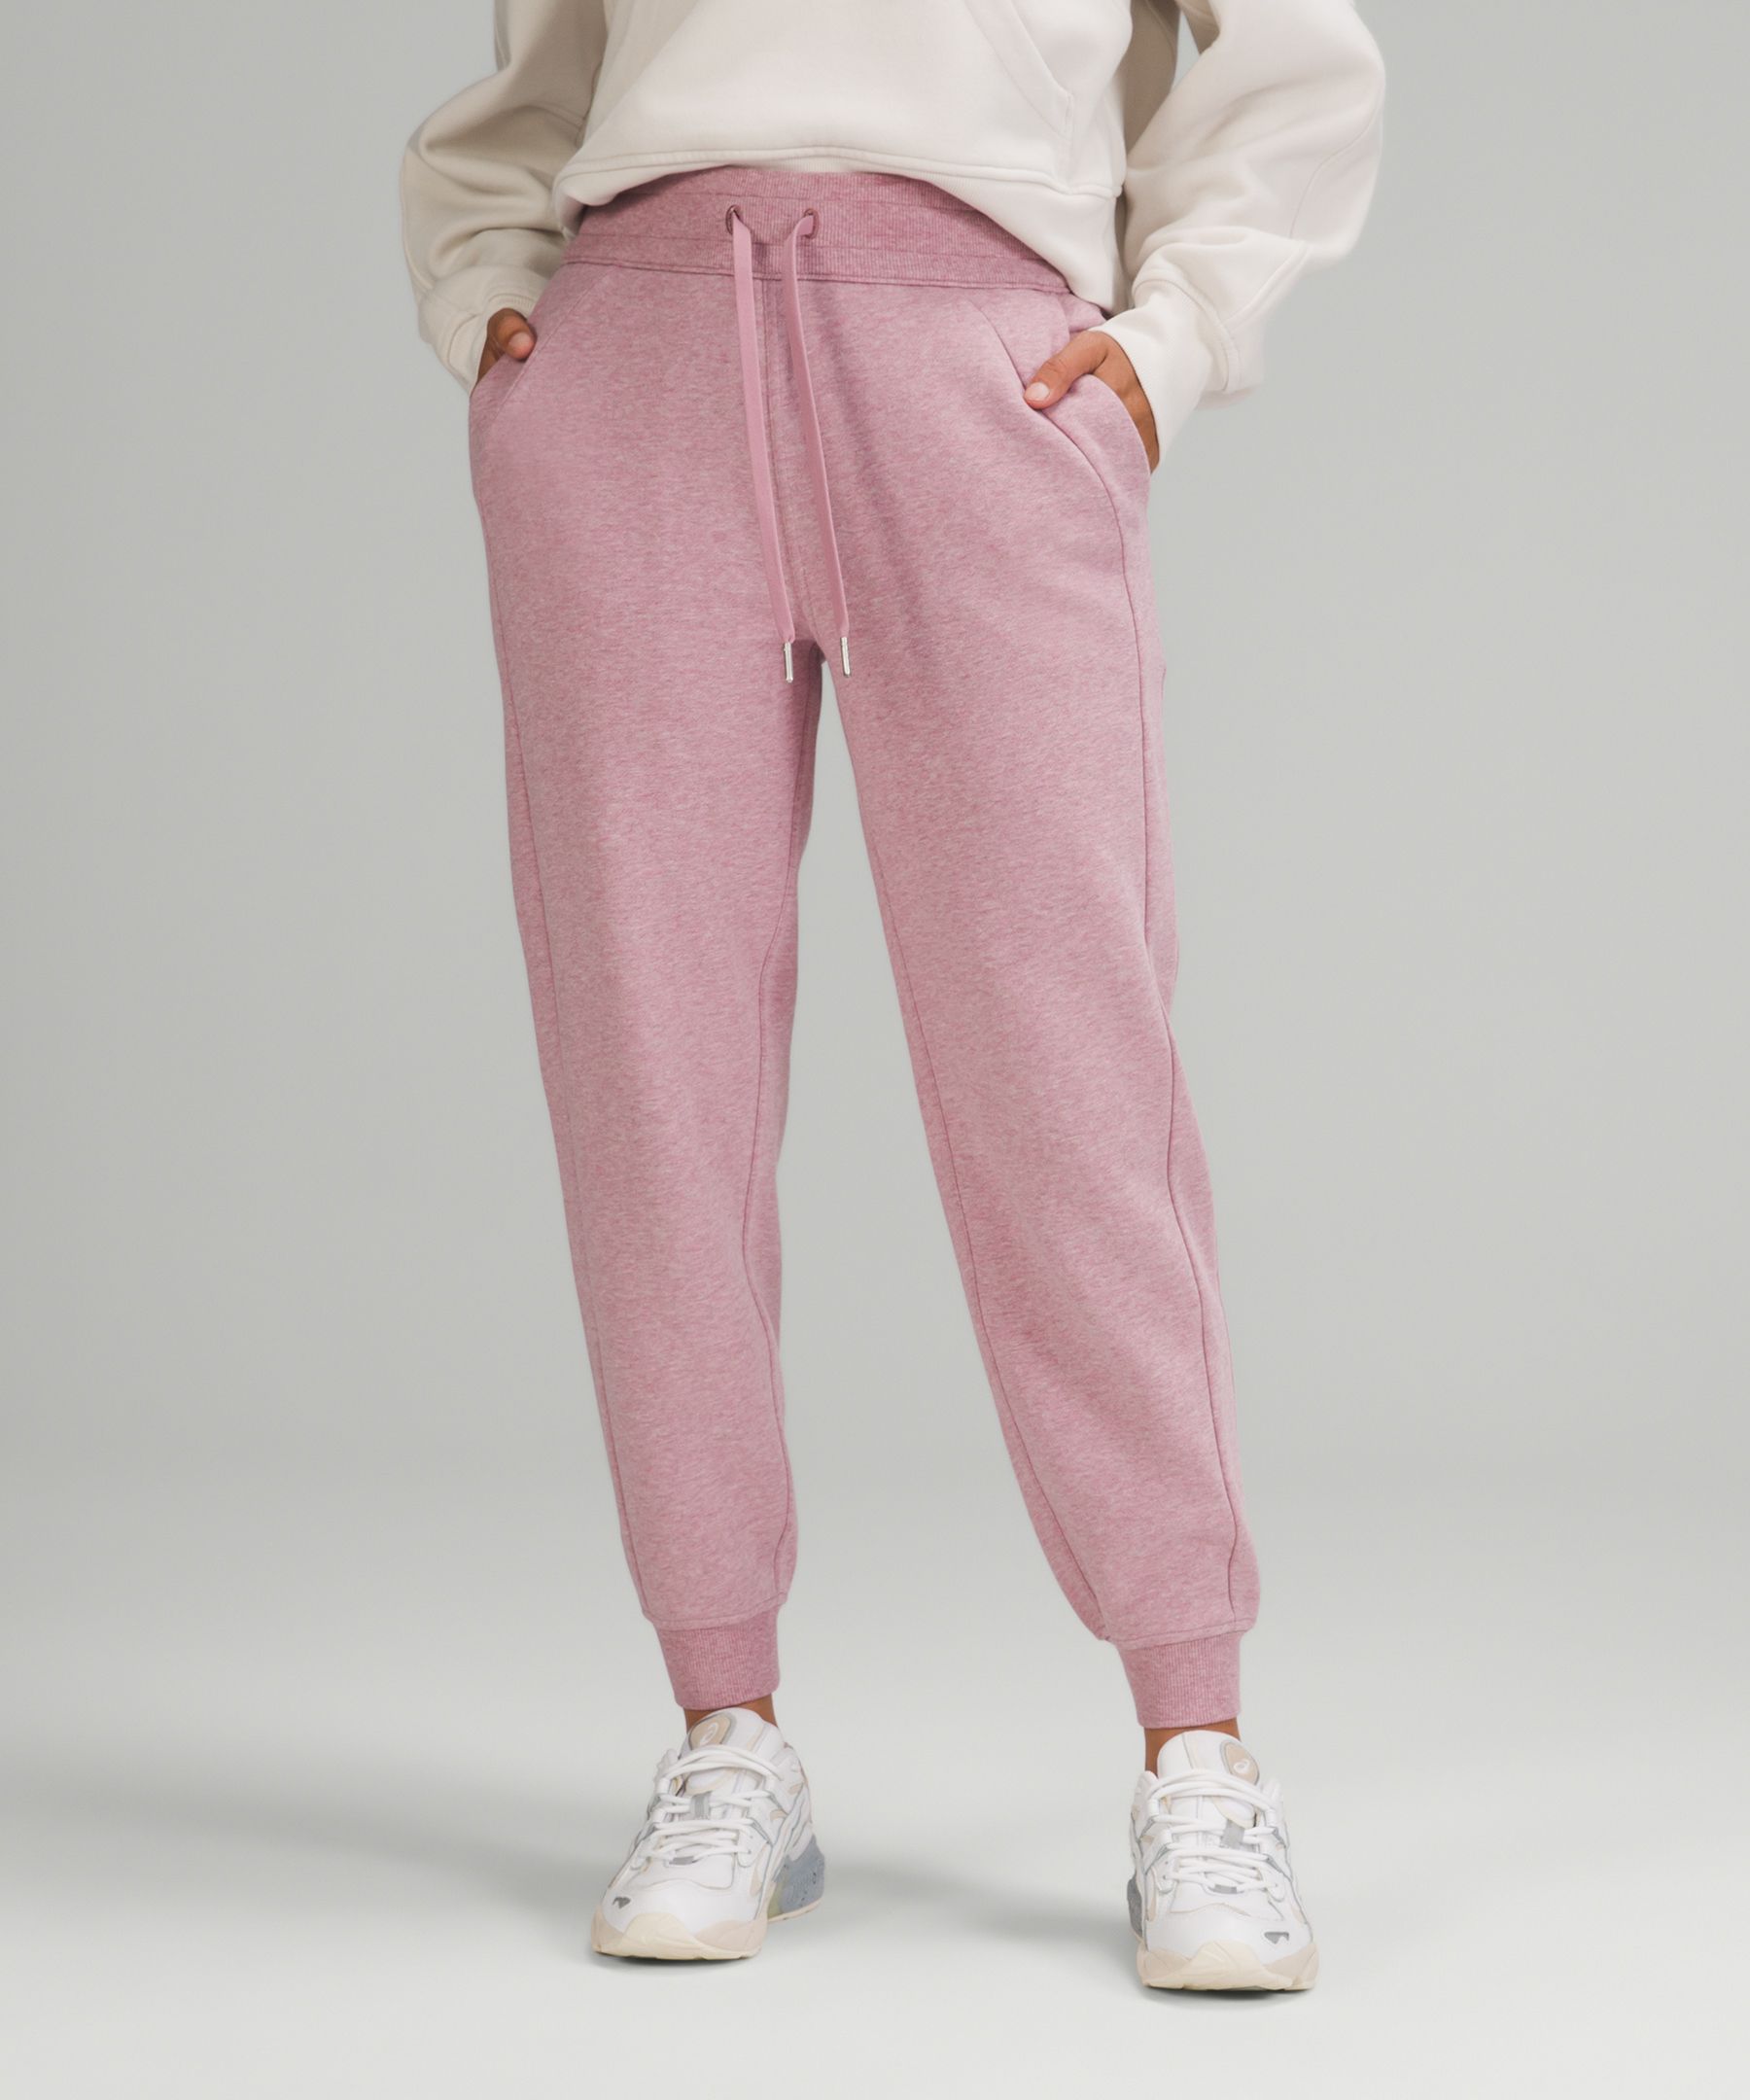 Lululemon Scuba High-rise Joggers 7/8 Length In Heathered Pink